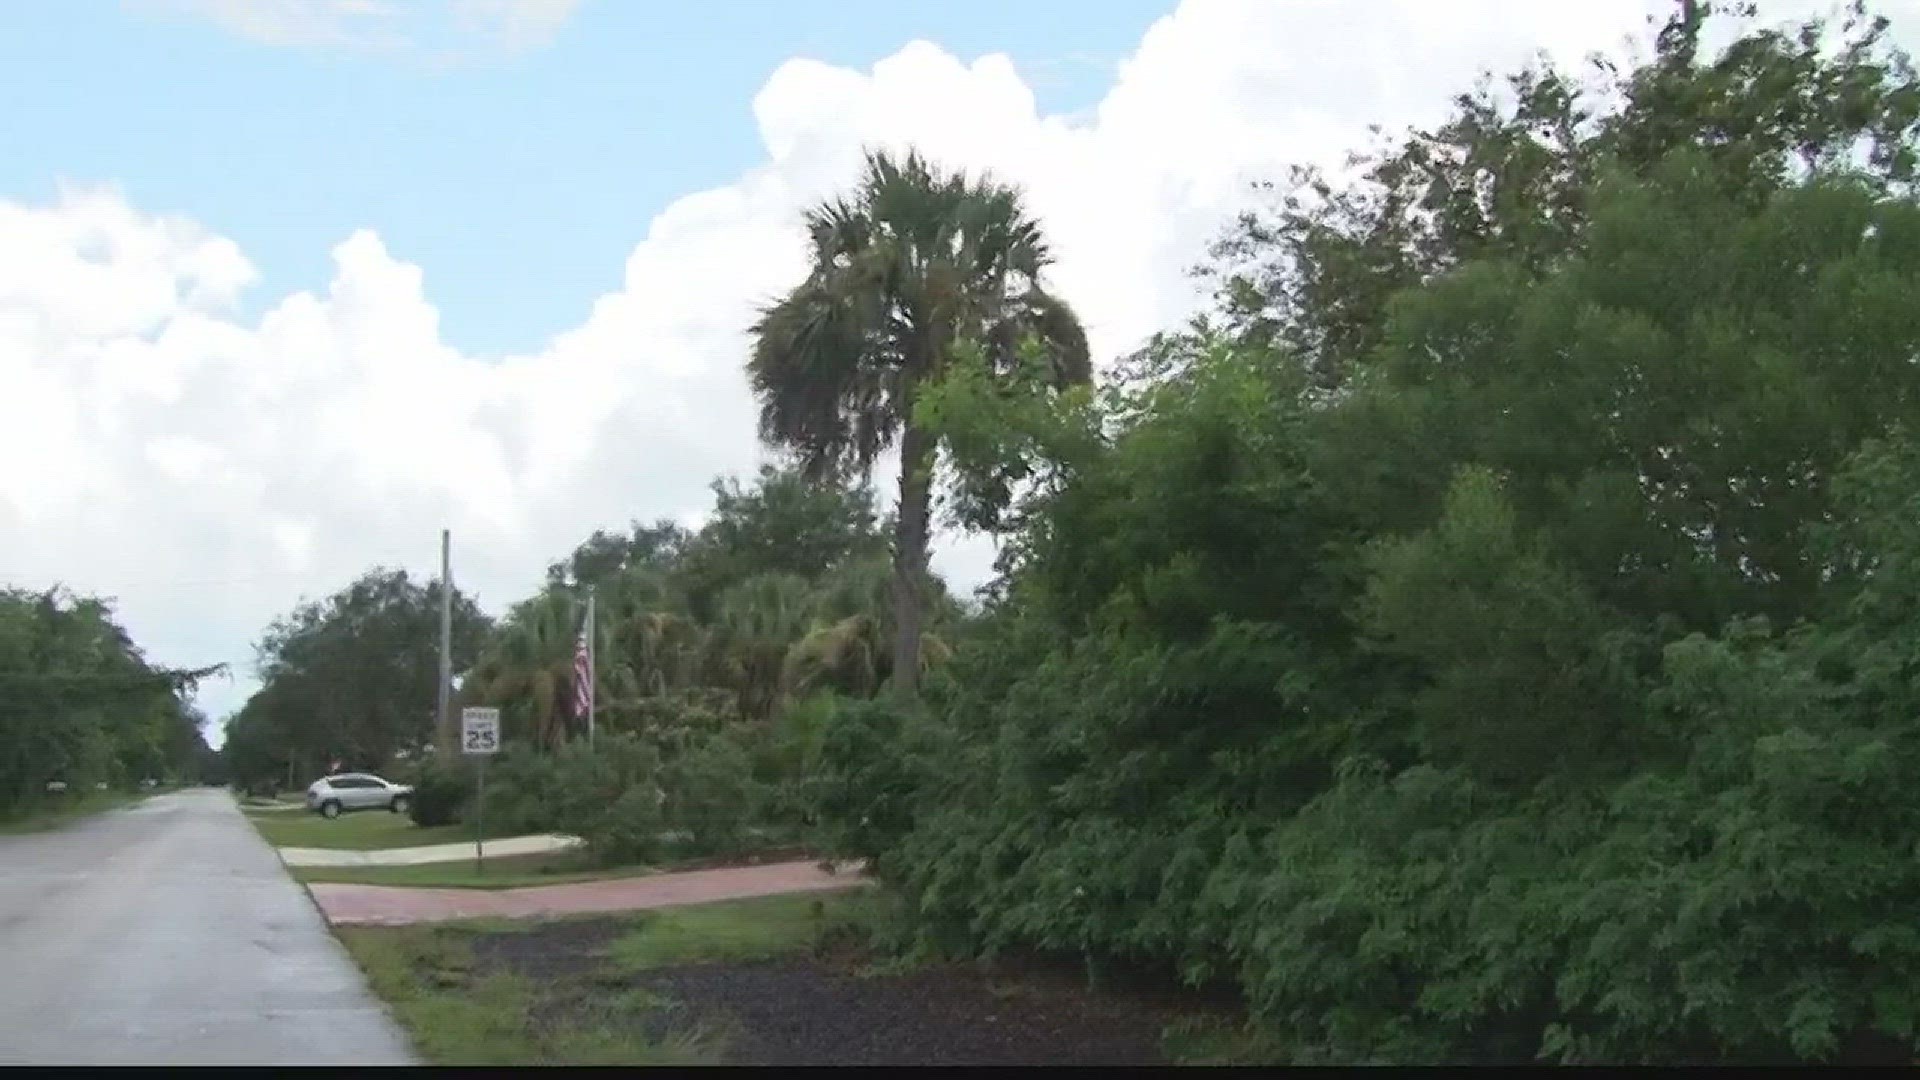 The state tree of Florida is often cut down when new buildings come up. But one city is looking to ensure the trees stay around.